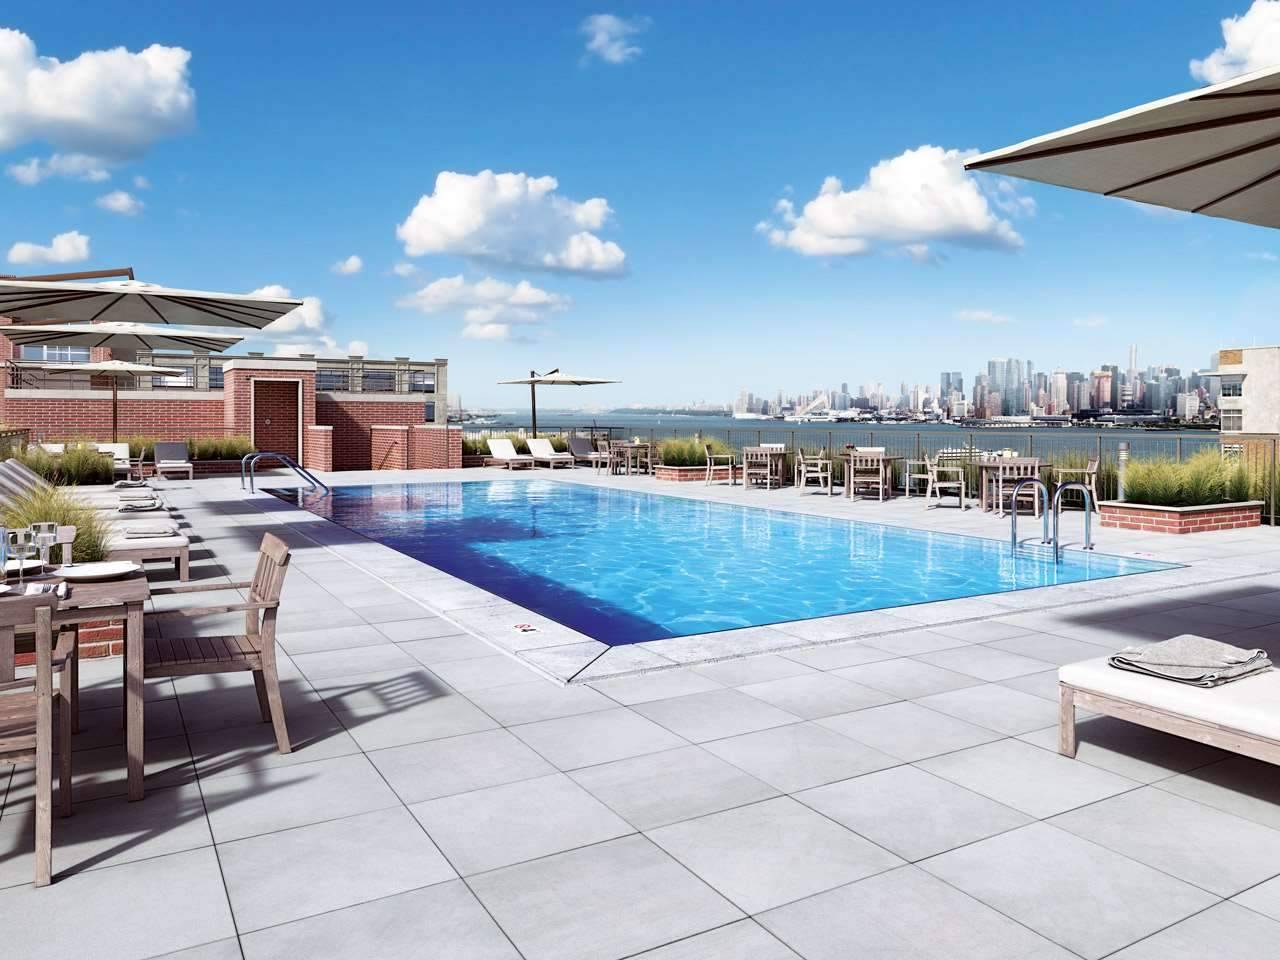 Welcome to Hoboken's newest luxury building - 1 BR New Jersey